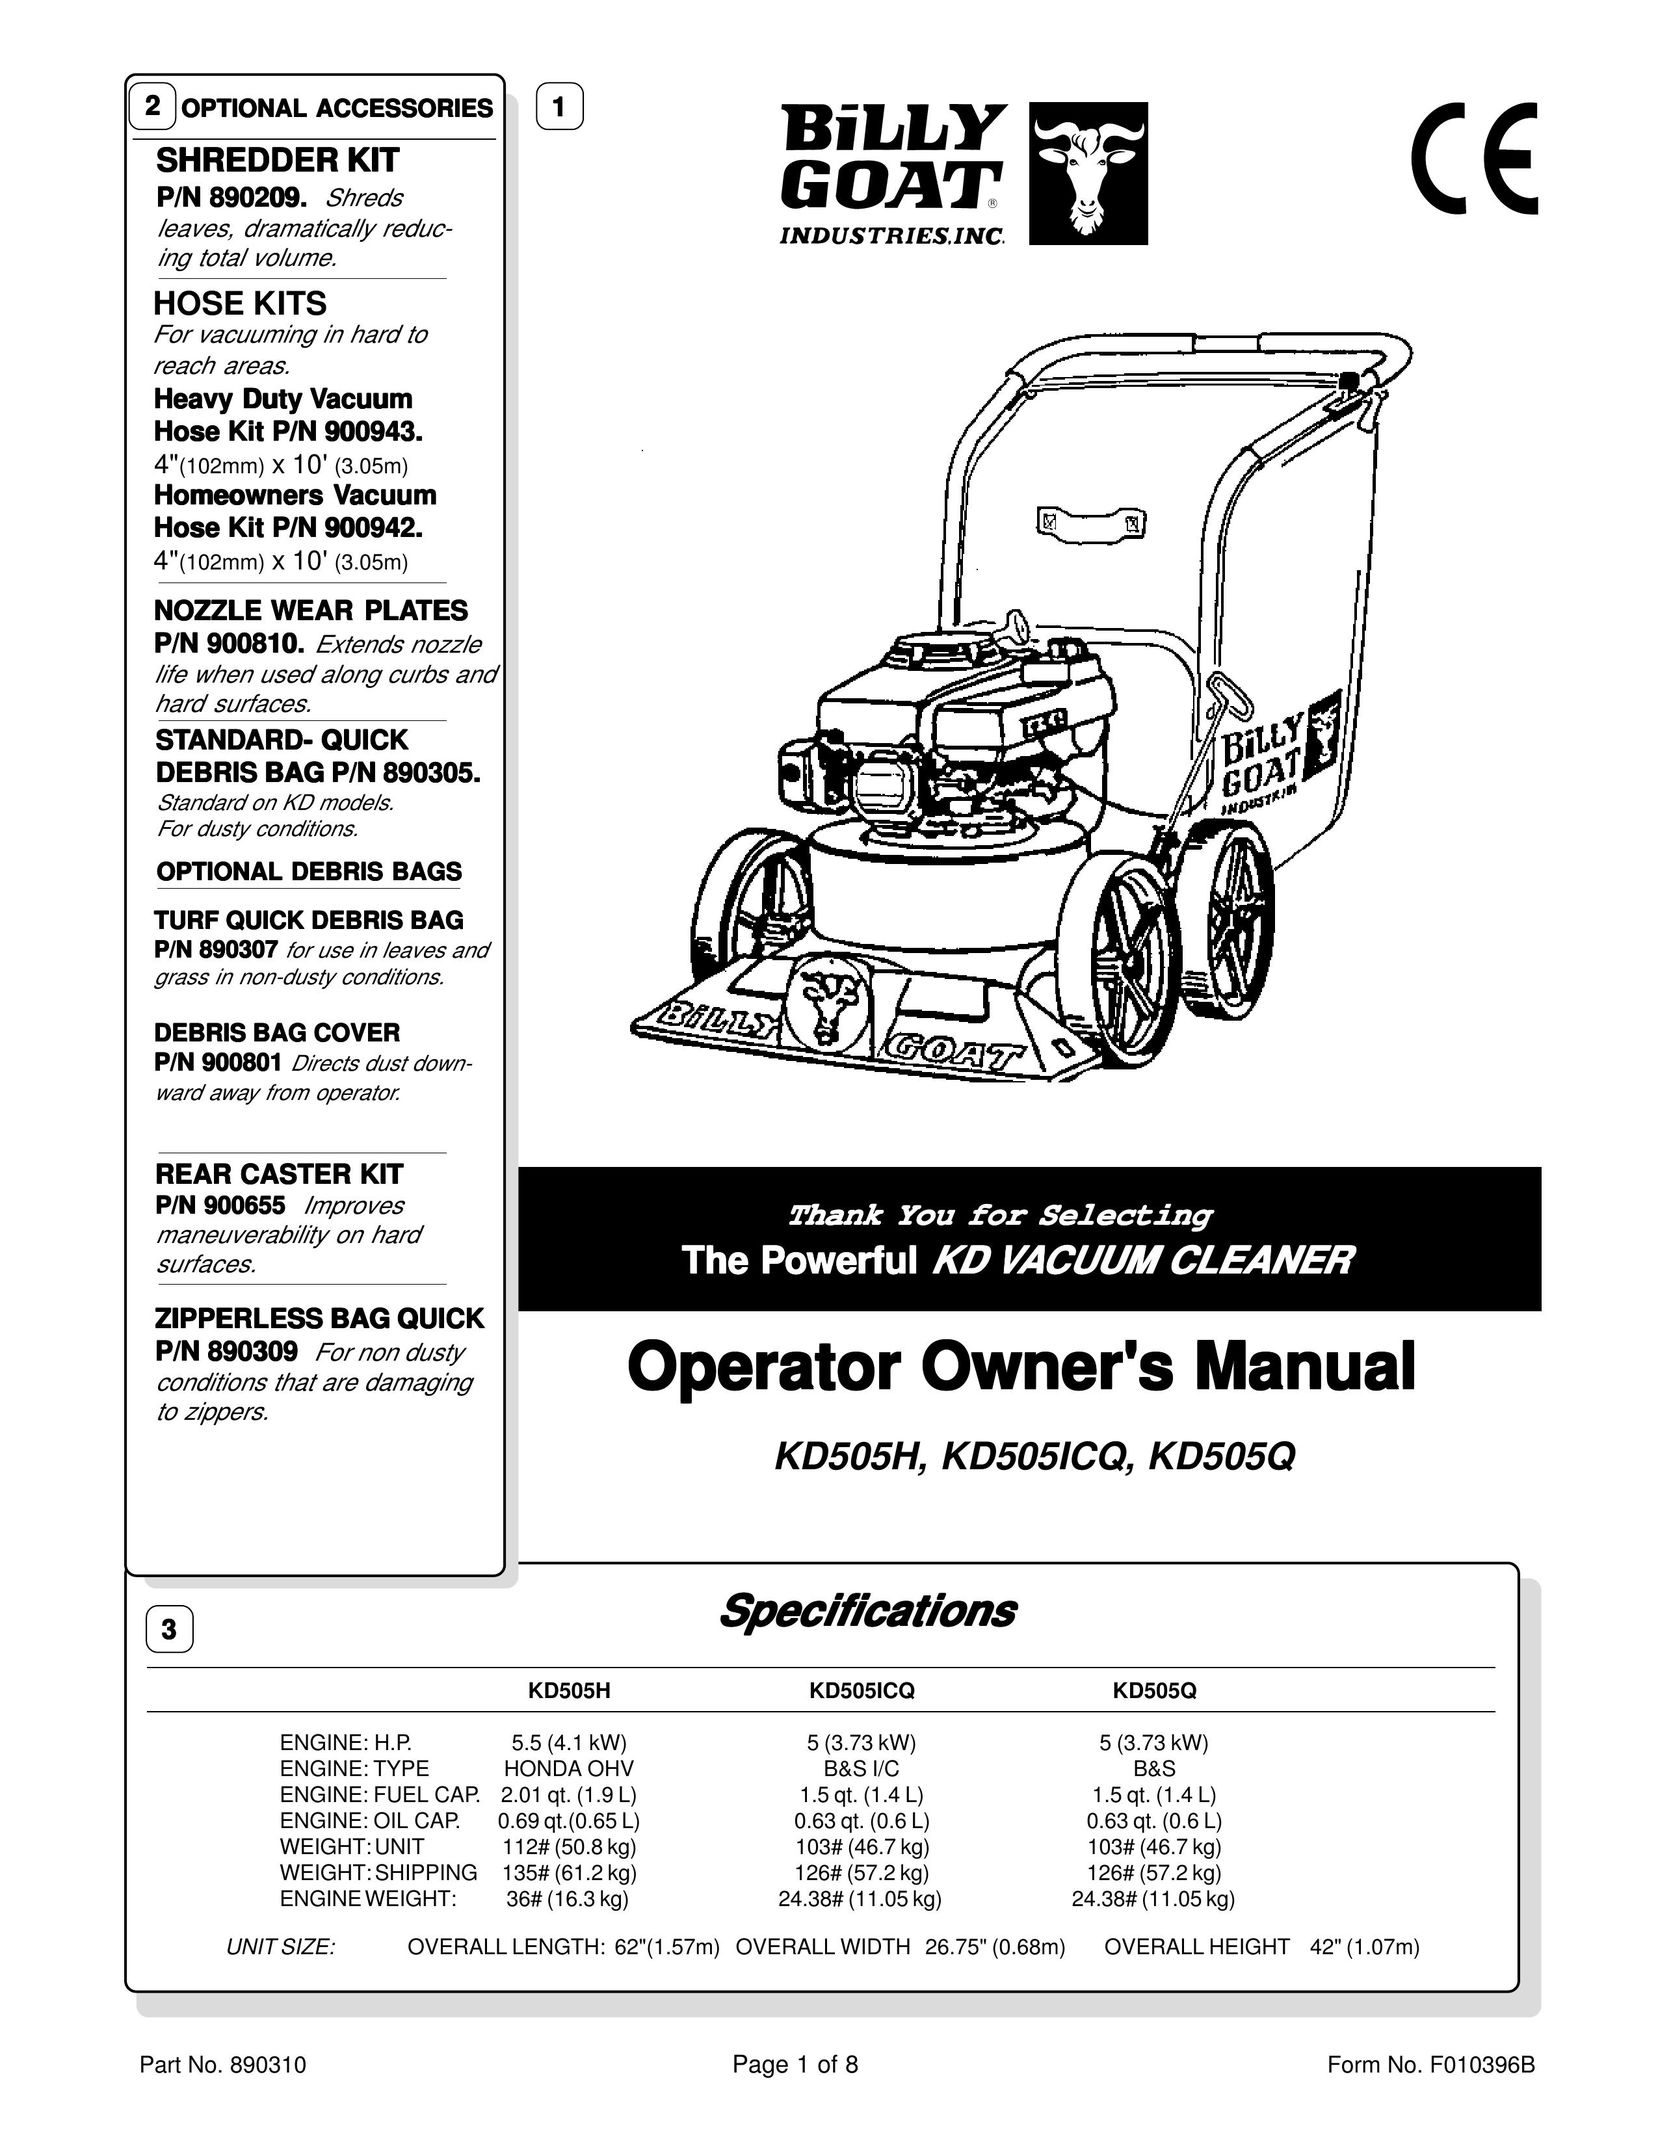 Billy Goat KD505ICQ Vacuum Cleaner User Manual